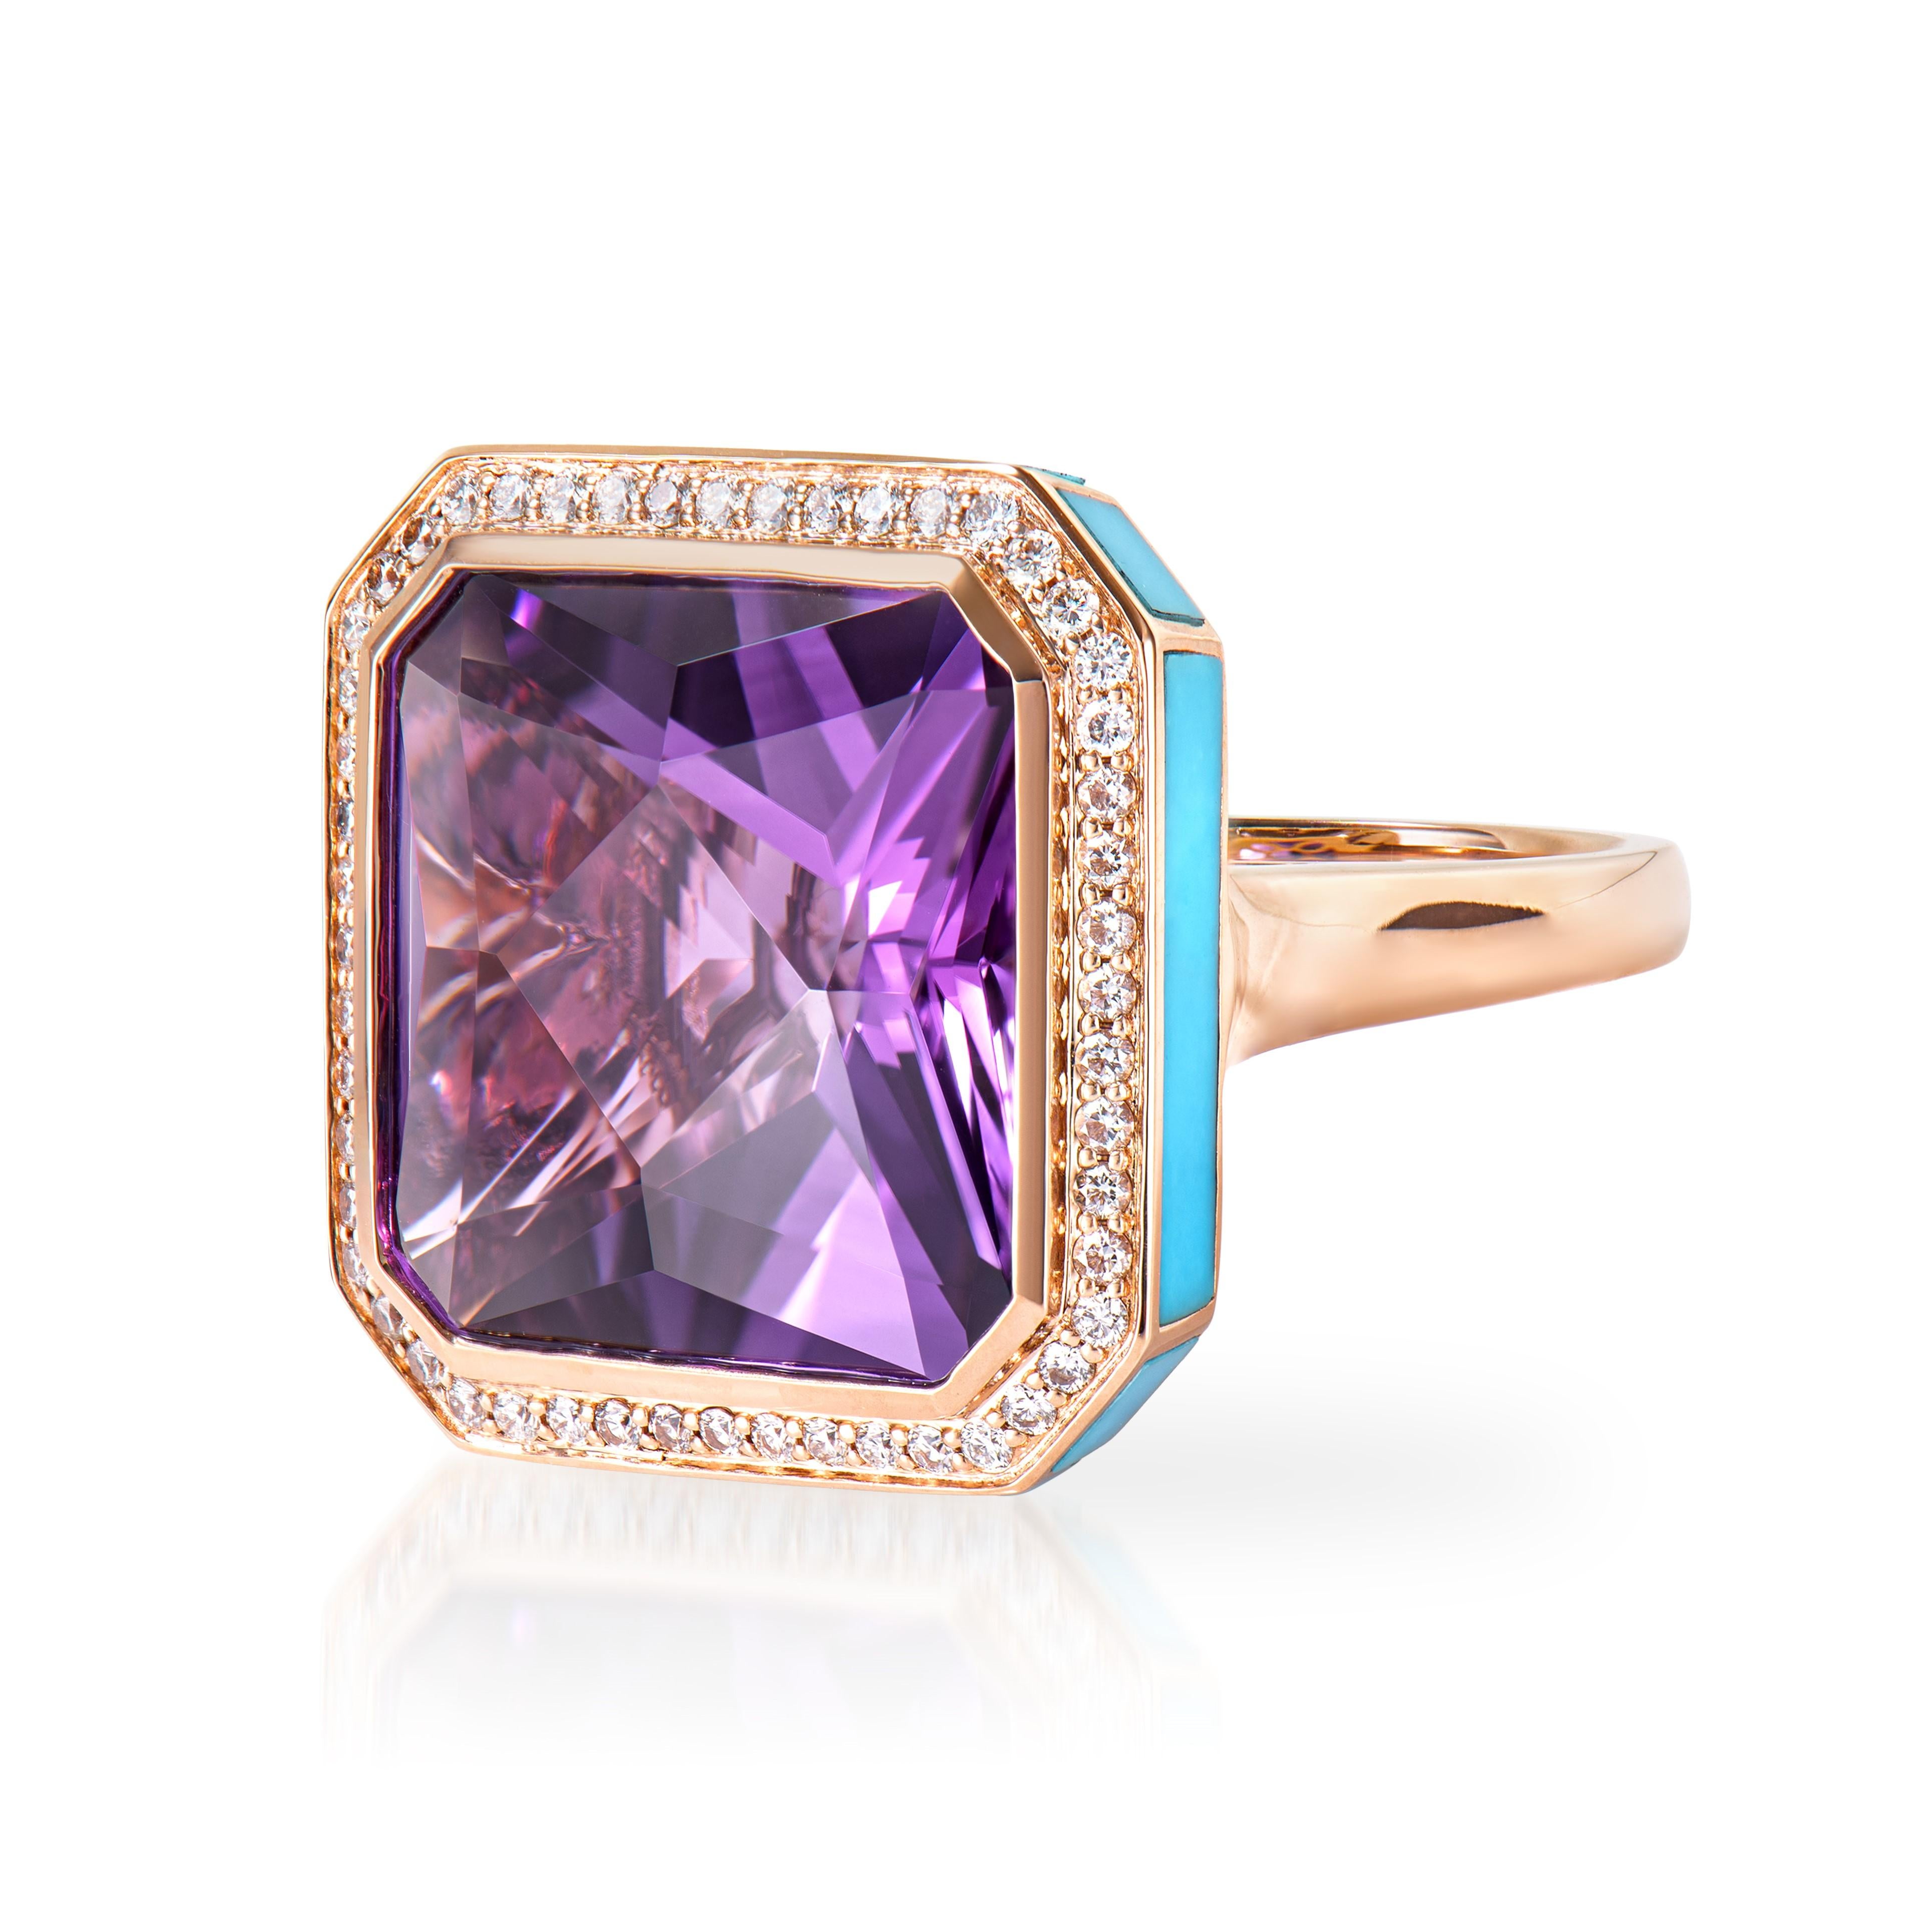 Octagon Cut 15.32 Carat Amethyst Fancy Ring in 14KRG with Rhodolite, Turquoise & Diamond.   For Sale